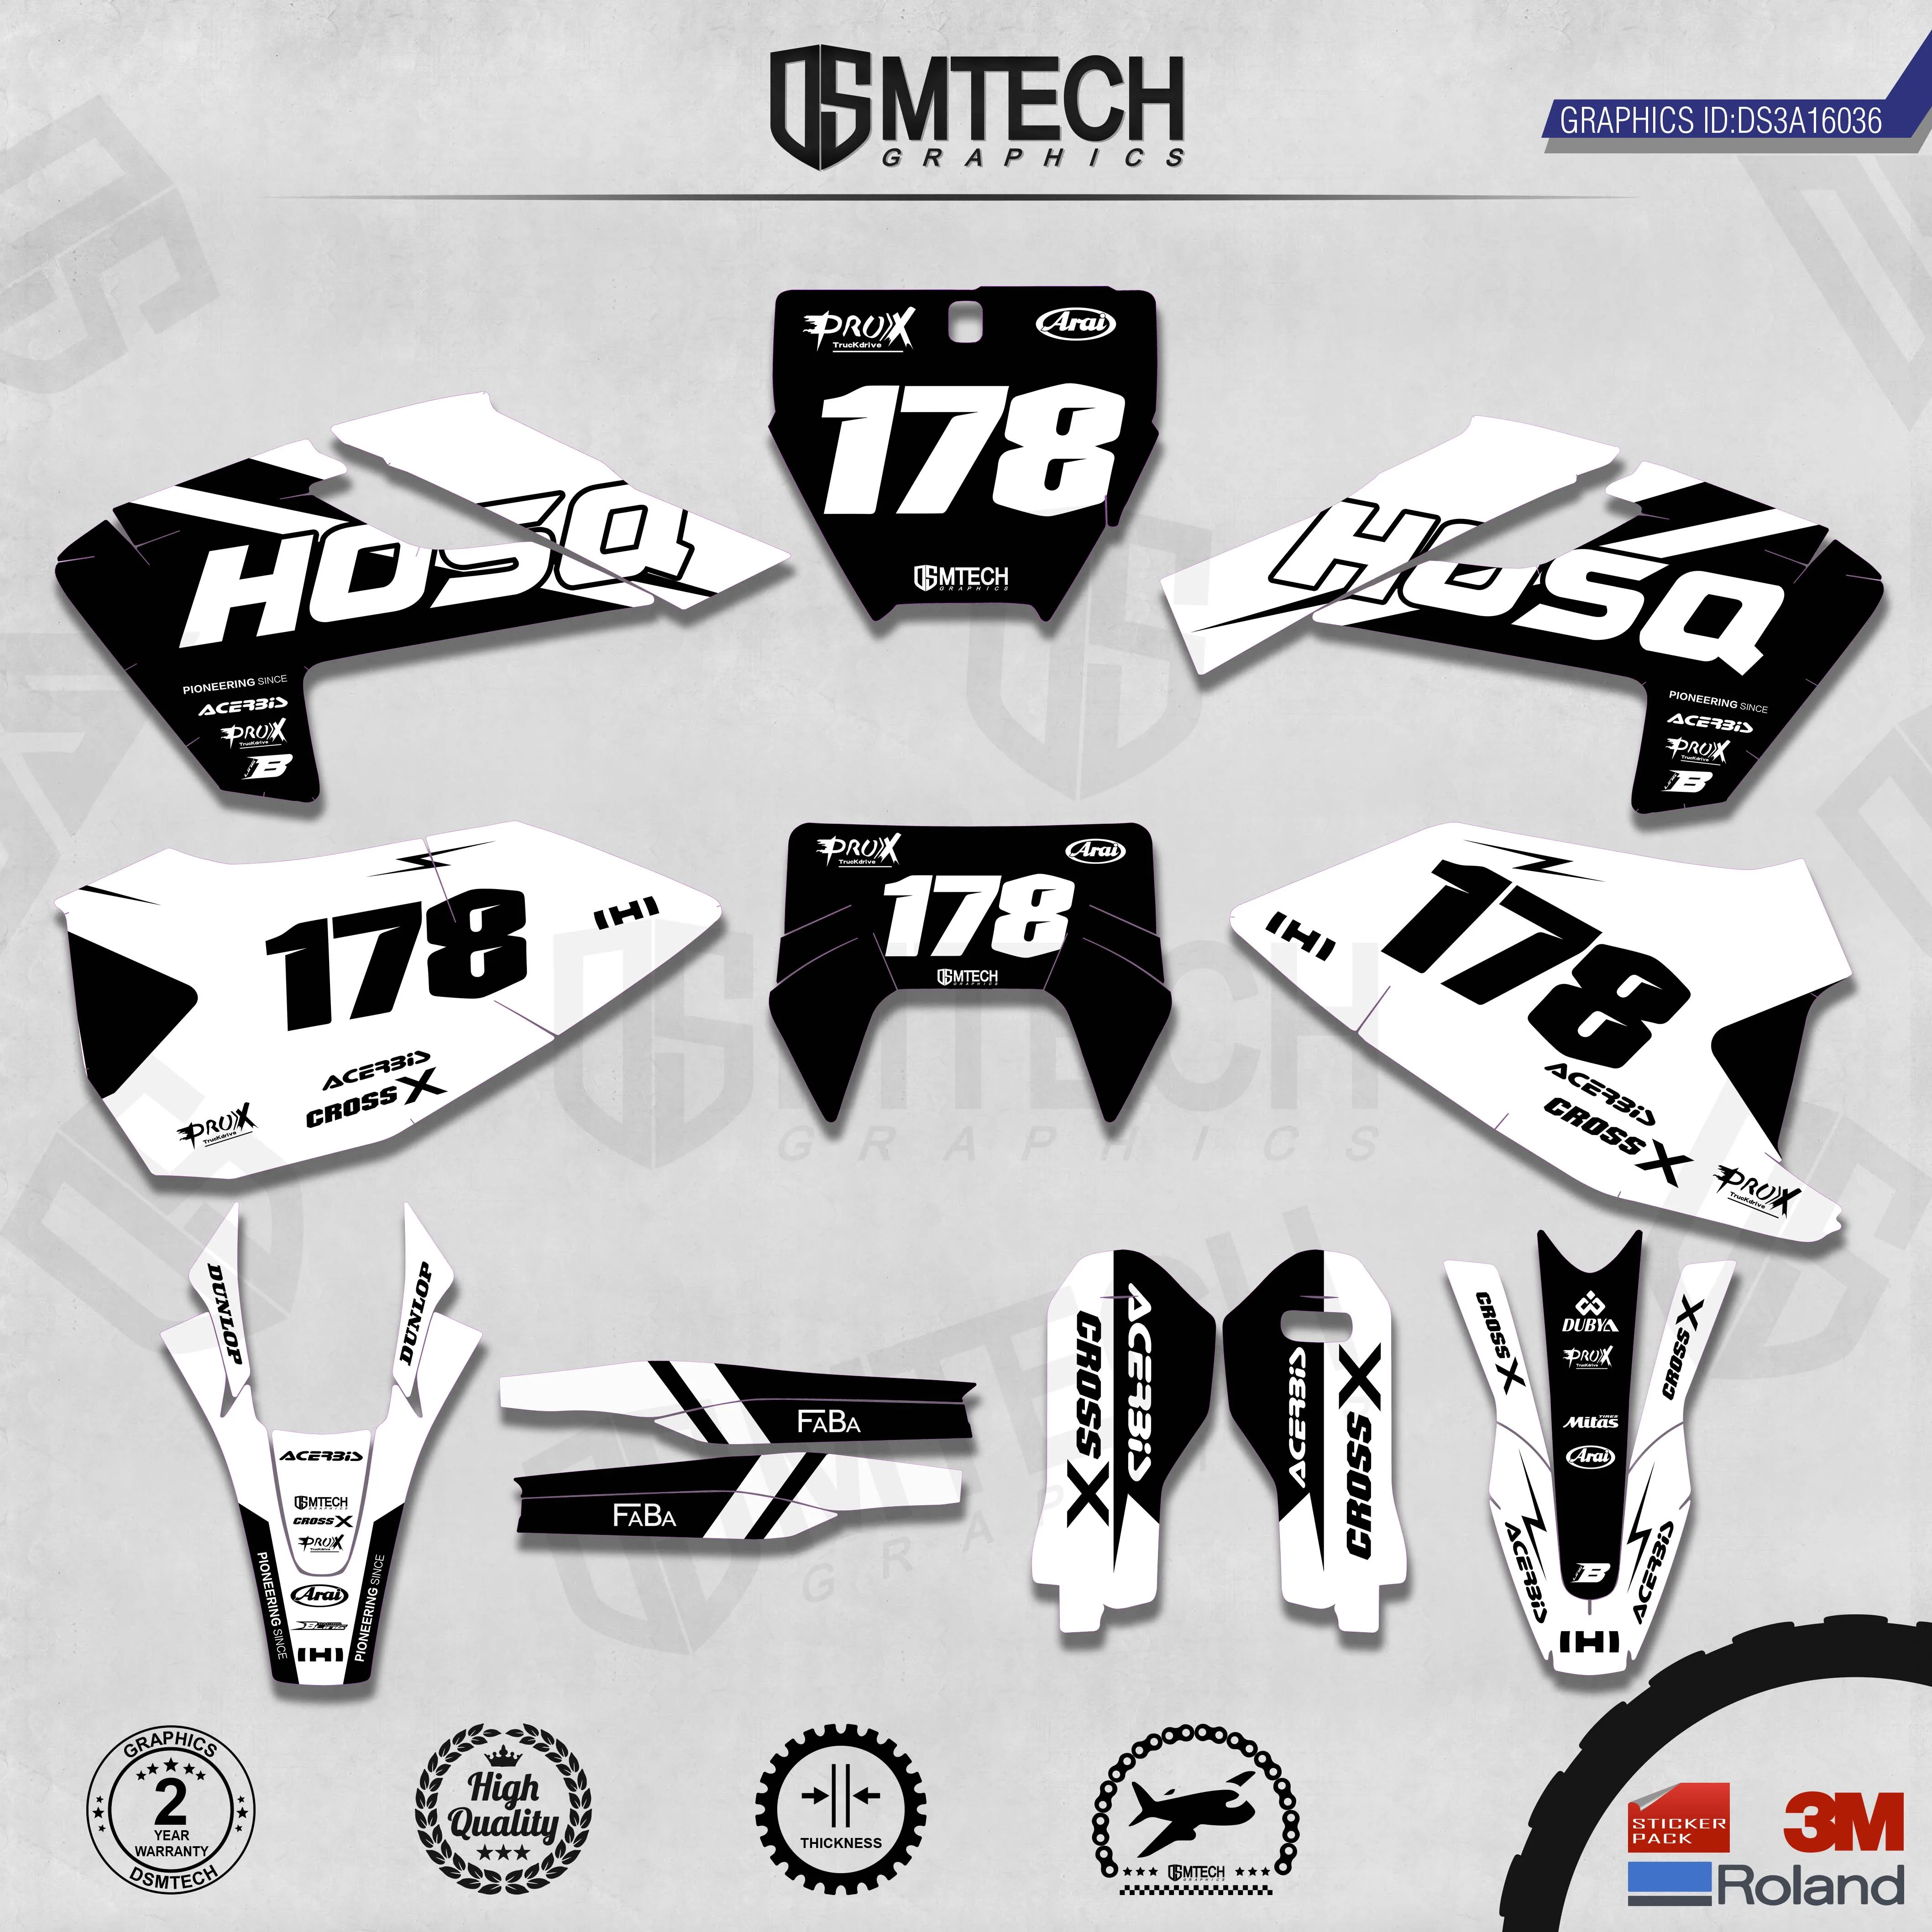 DSMTECH Customized Team Graphics Backgrounds Decals 3M Custom Stickers For TC FC TX FX FS 2016-2018  TE FE 2017-2019  036